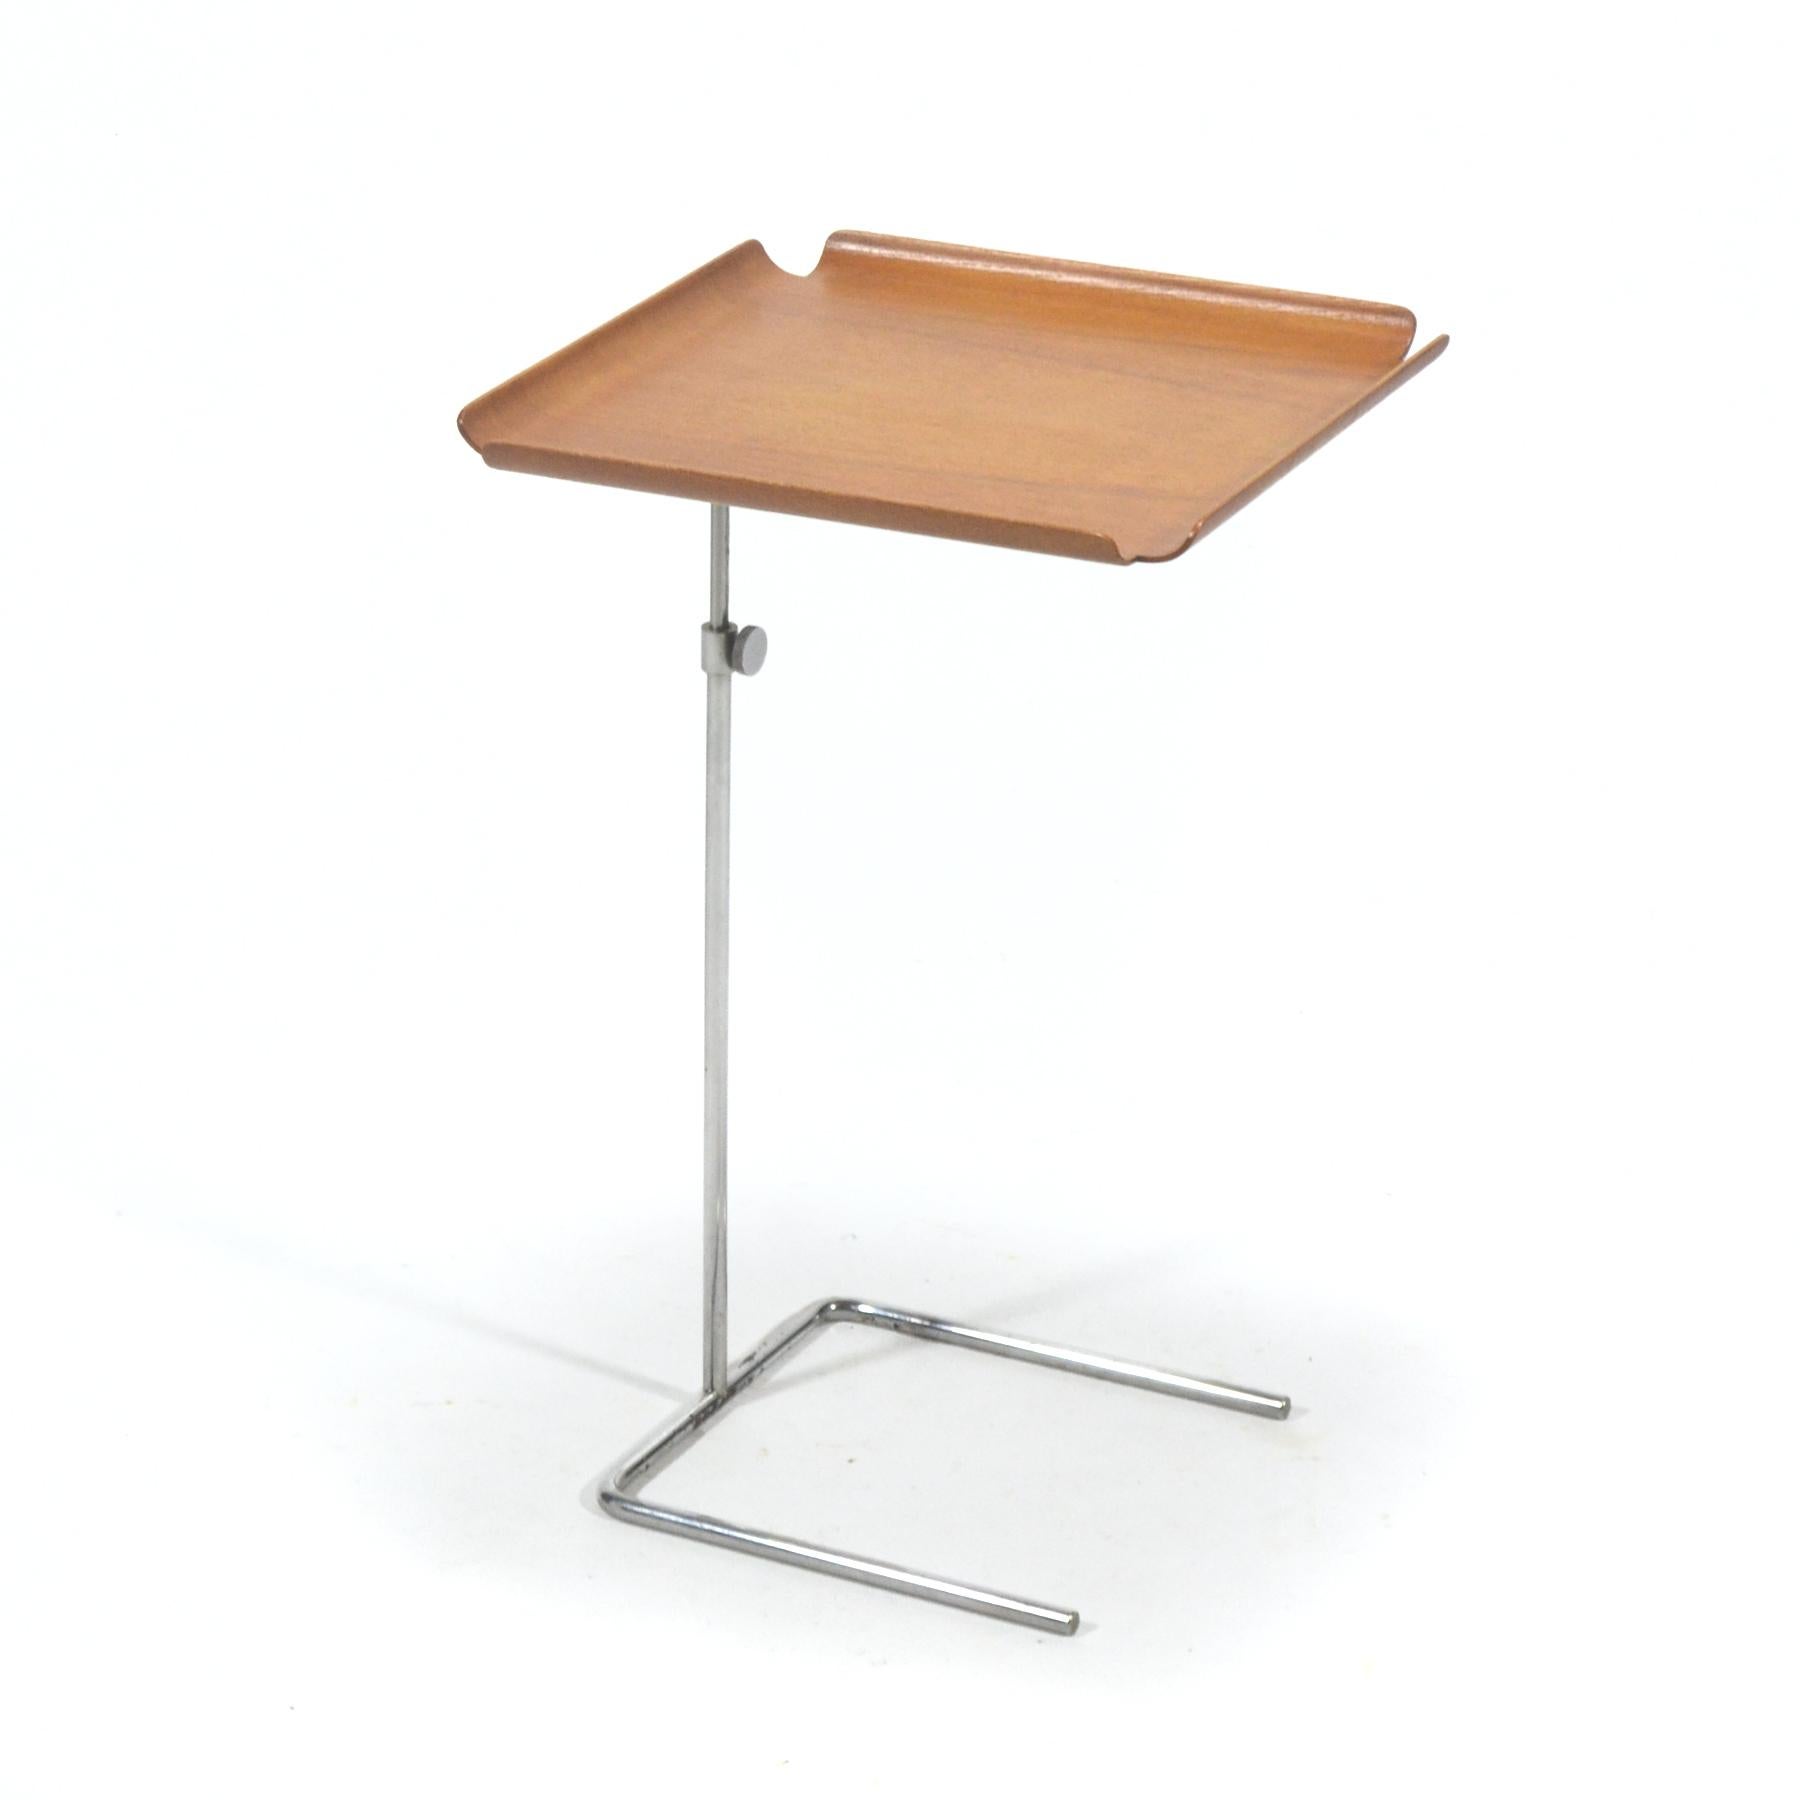 Mid-20th Century George Nelson Adjustable Tray Table by Herman Miller